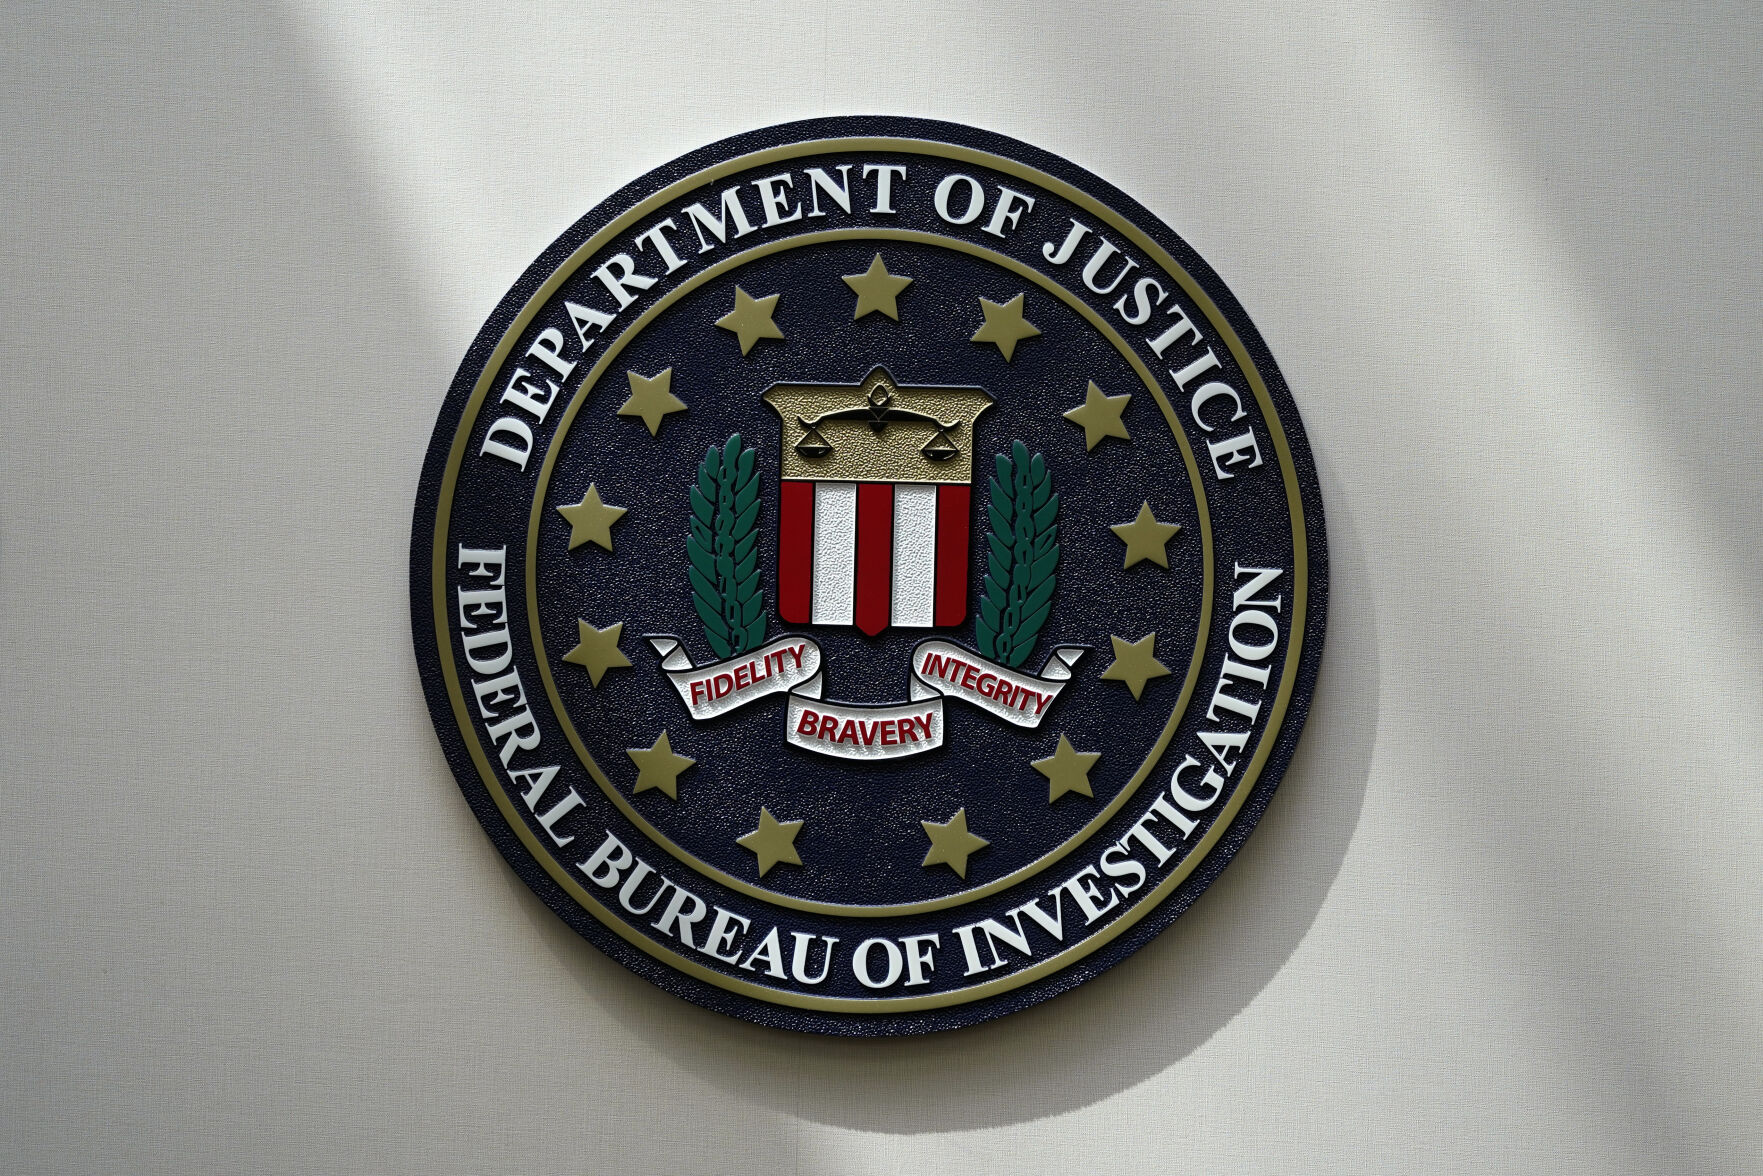 <p>FILE - An FBI seal is seen on a wall on Aug. 10, 2022, in Omaha, Neb. The FBI says scammers stole more than $3.4 billion from older Americans last year. An FBI report released Tuesday shows a rise in losses through increasingly sophisticated tactics to trick the vulnerable into giving up their life savings. (AP Photo/Charlie Neibergall, File)</p>   PHOTO CREDIT: Charlie Neibergall 